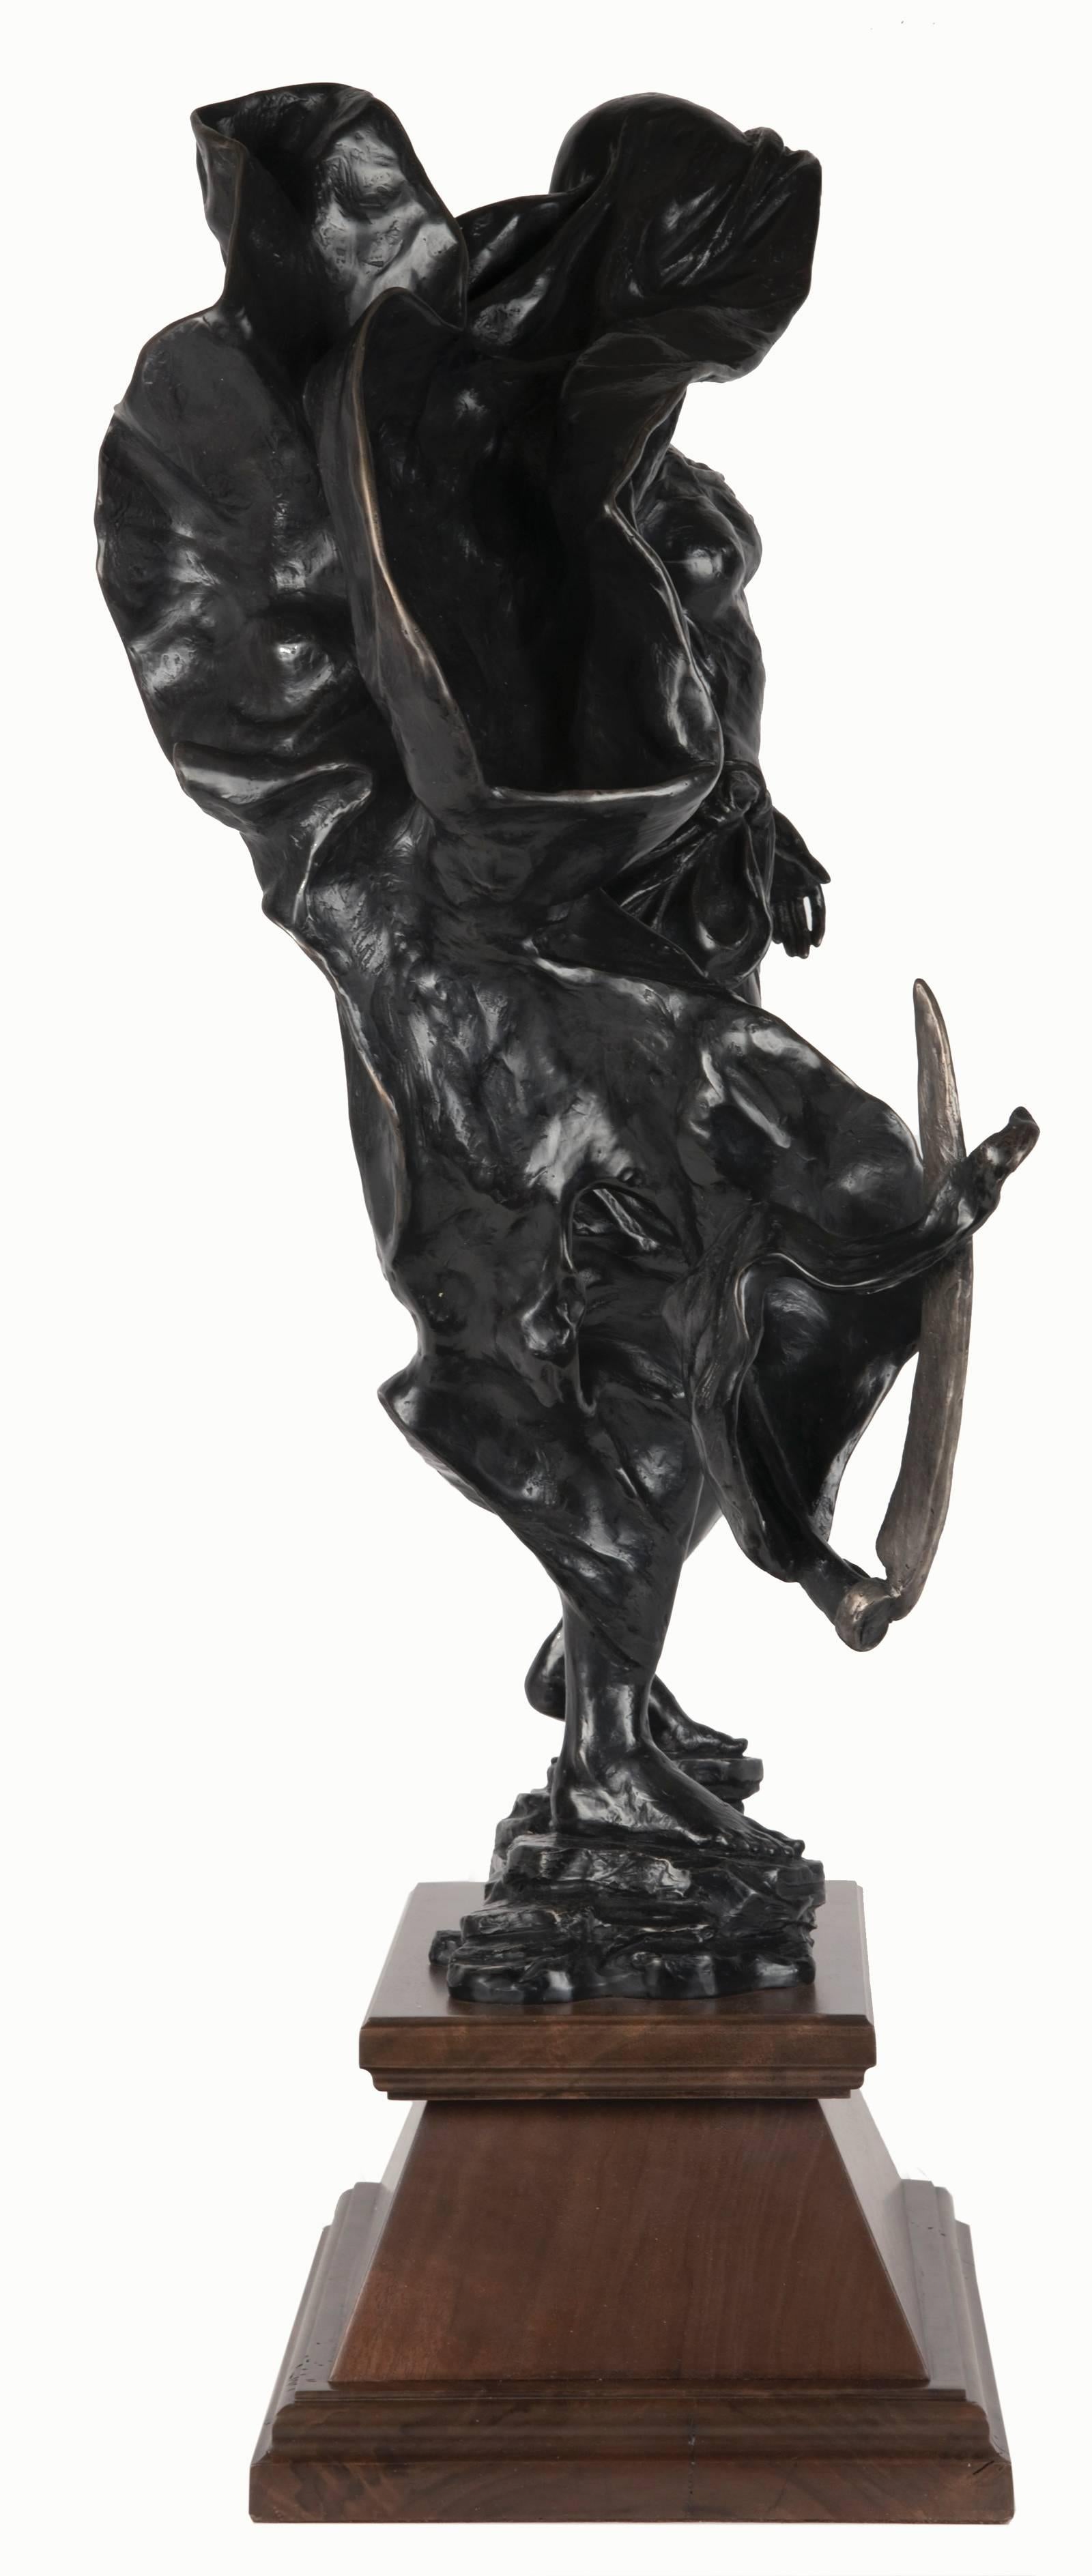 Standing in a state of observance and anticipated movement on a ground of rock, confidence and power exude from this figural sculpture. This sense of stability in direct contrast to the display of movement and emotion as seen in its billowing